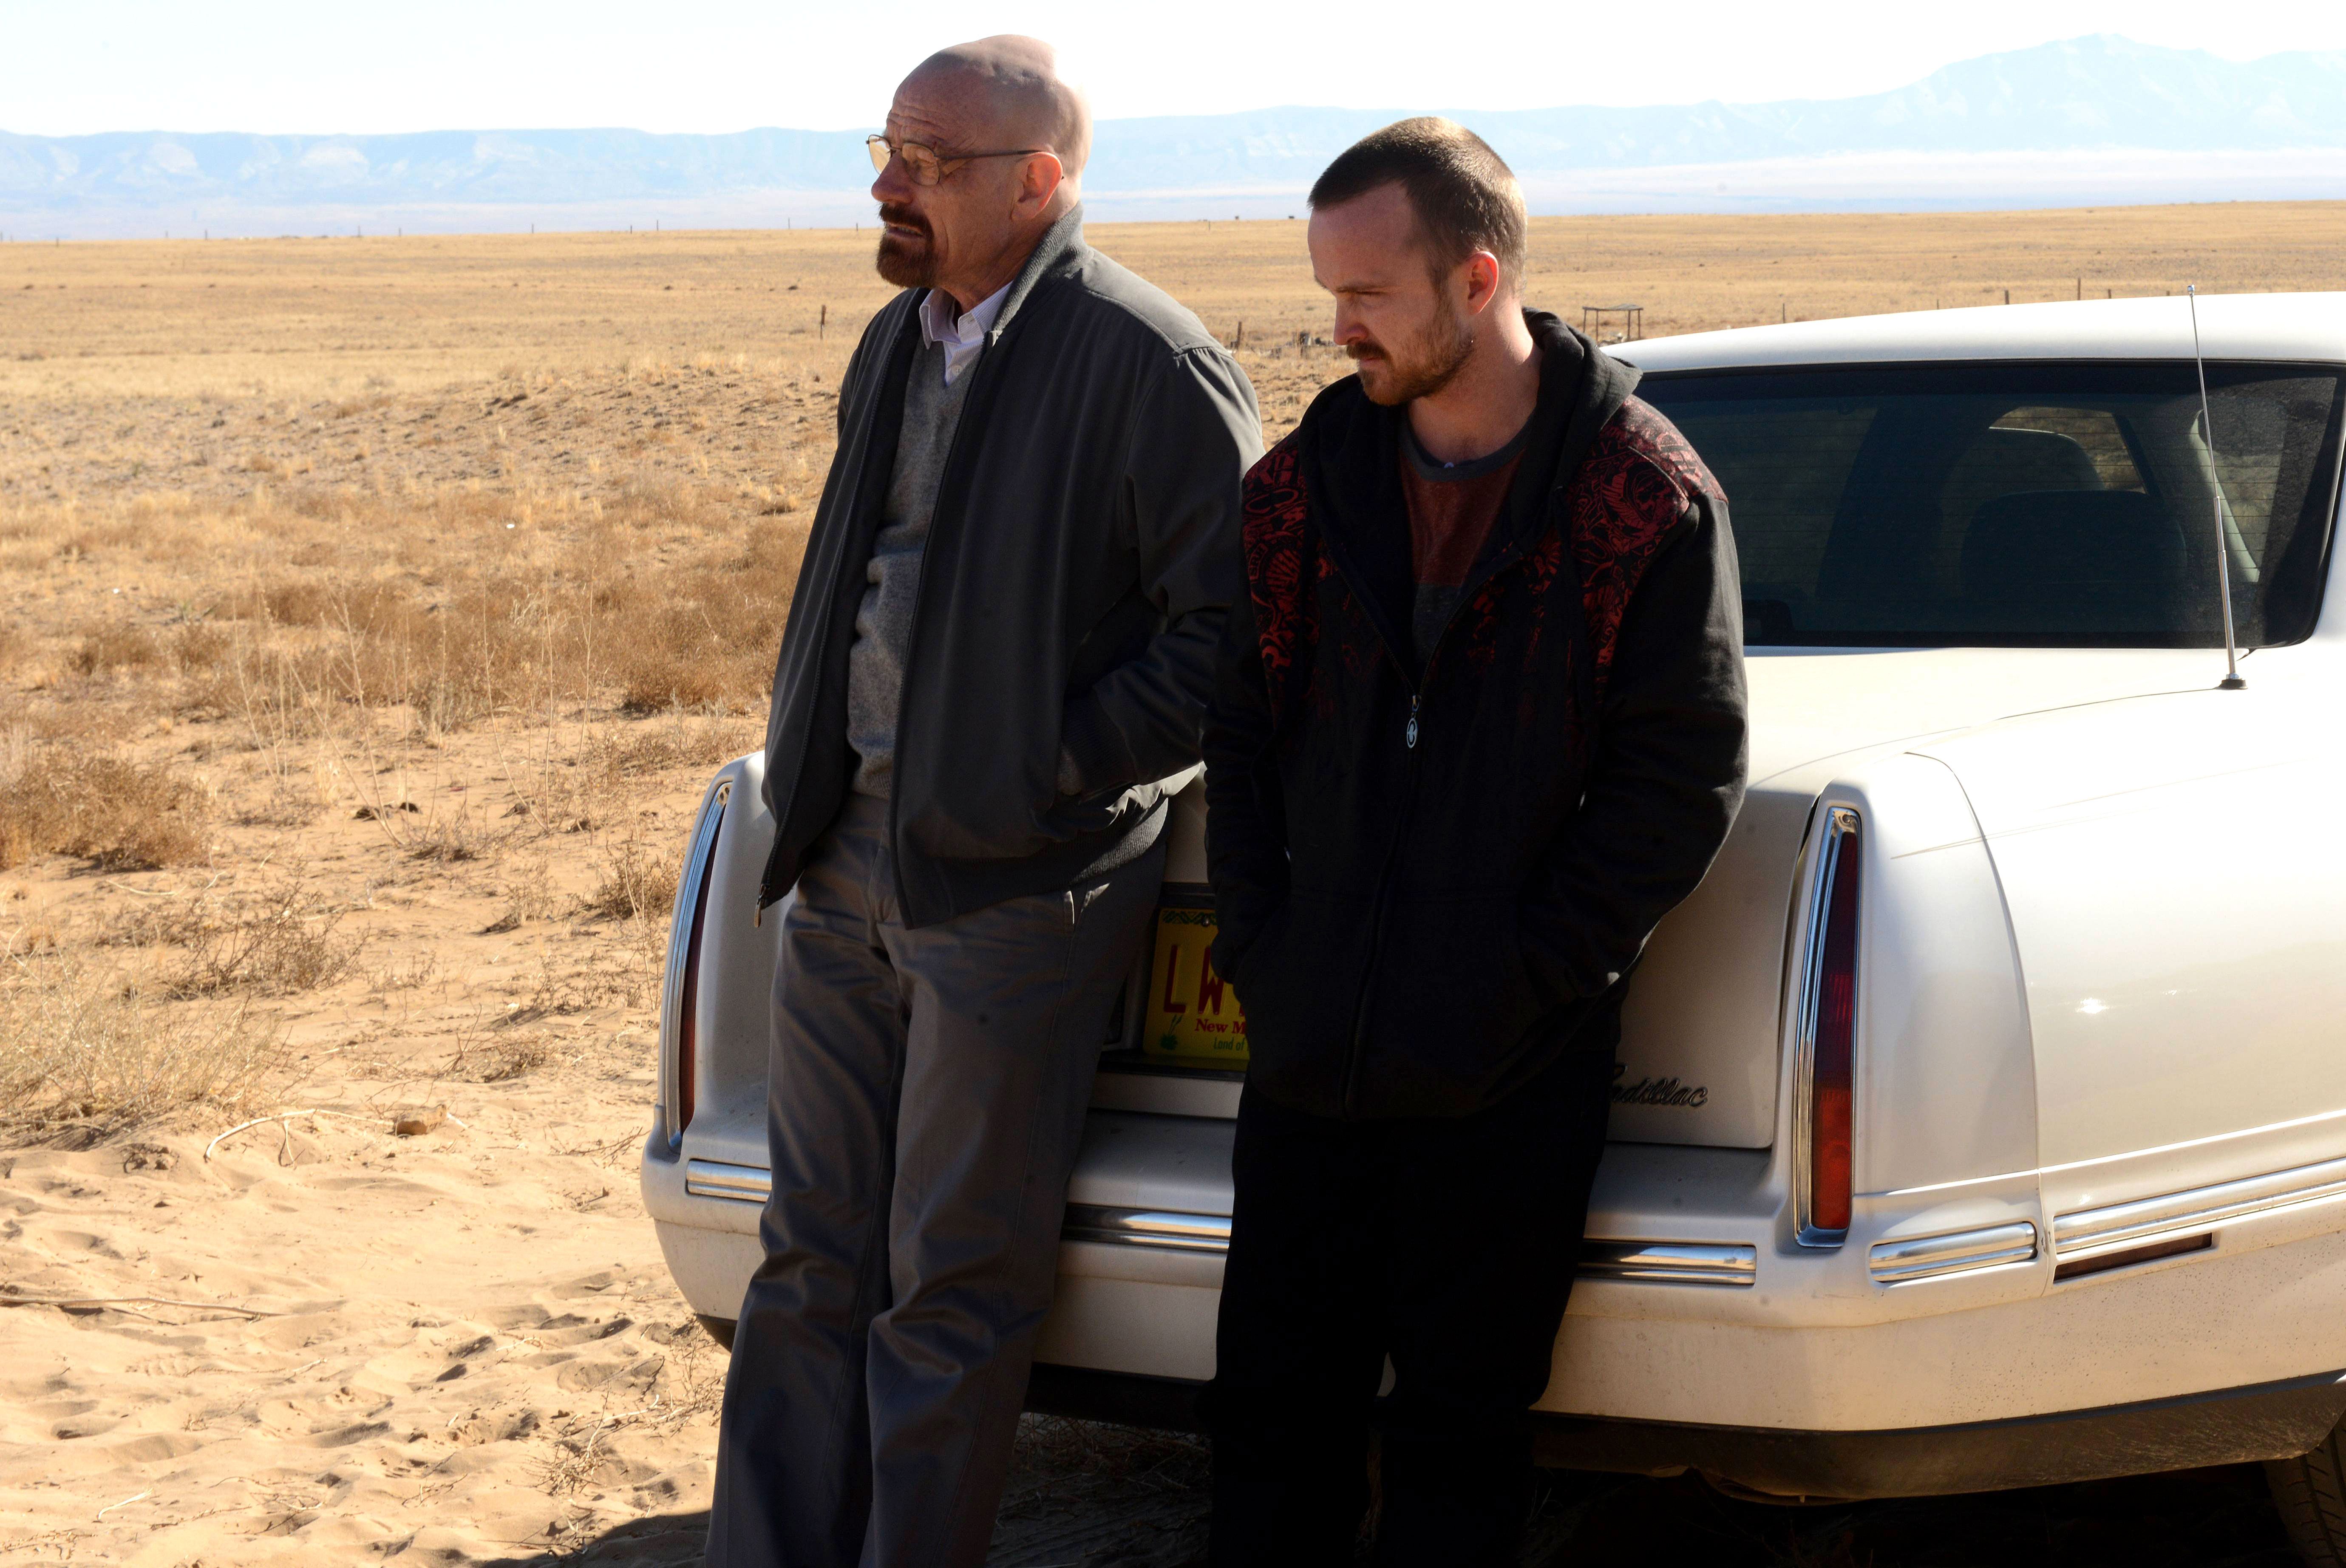 Walt and Jesse's Better Call Saul Roles Will Defy Expectations - PRIMETIMER